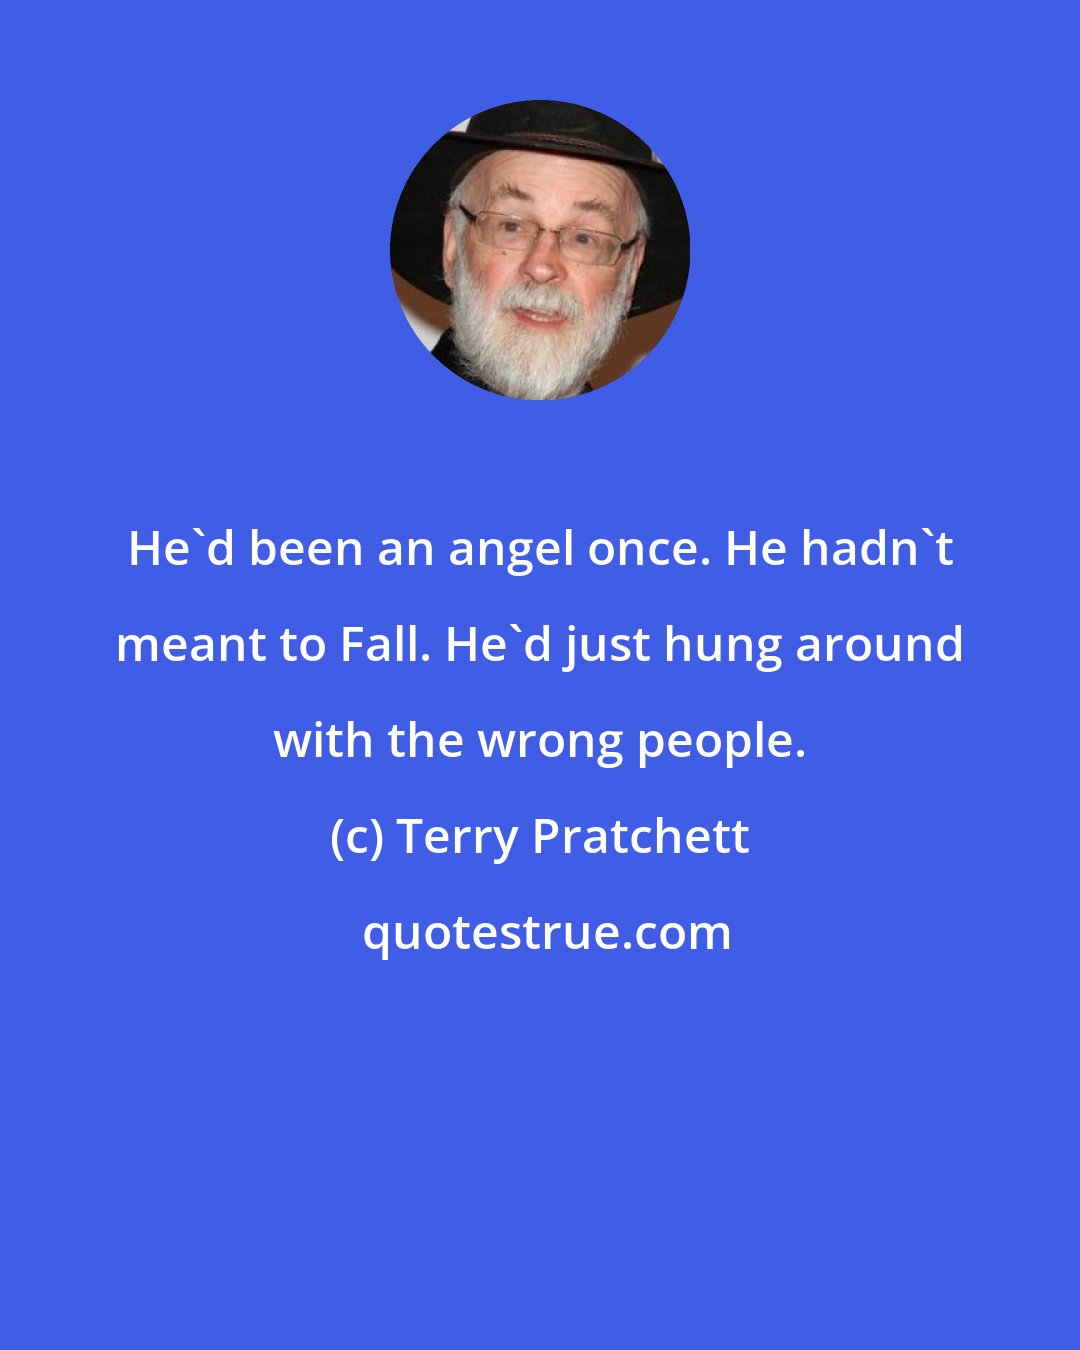 Terry Pratchett: He'd been an angel once. He hadn't meant to Fall. He'd just hung around with the wrong people.